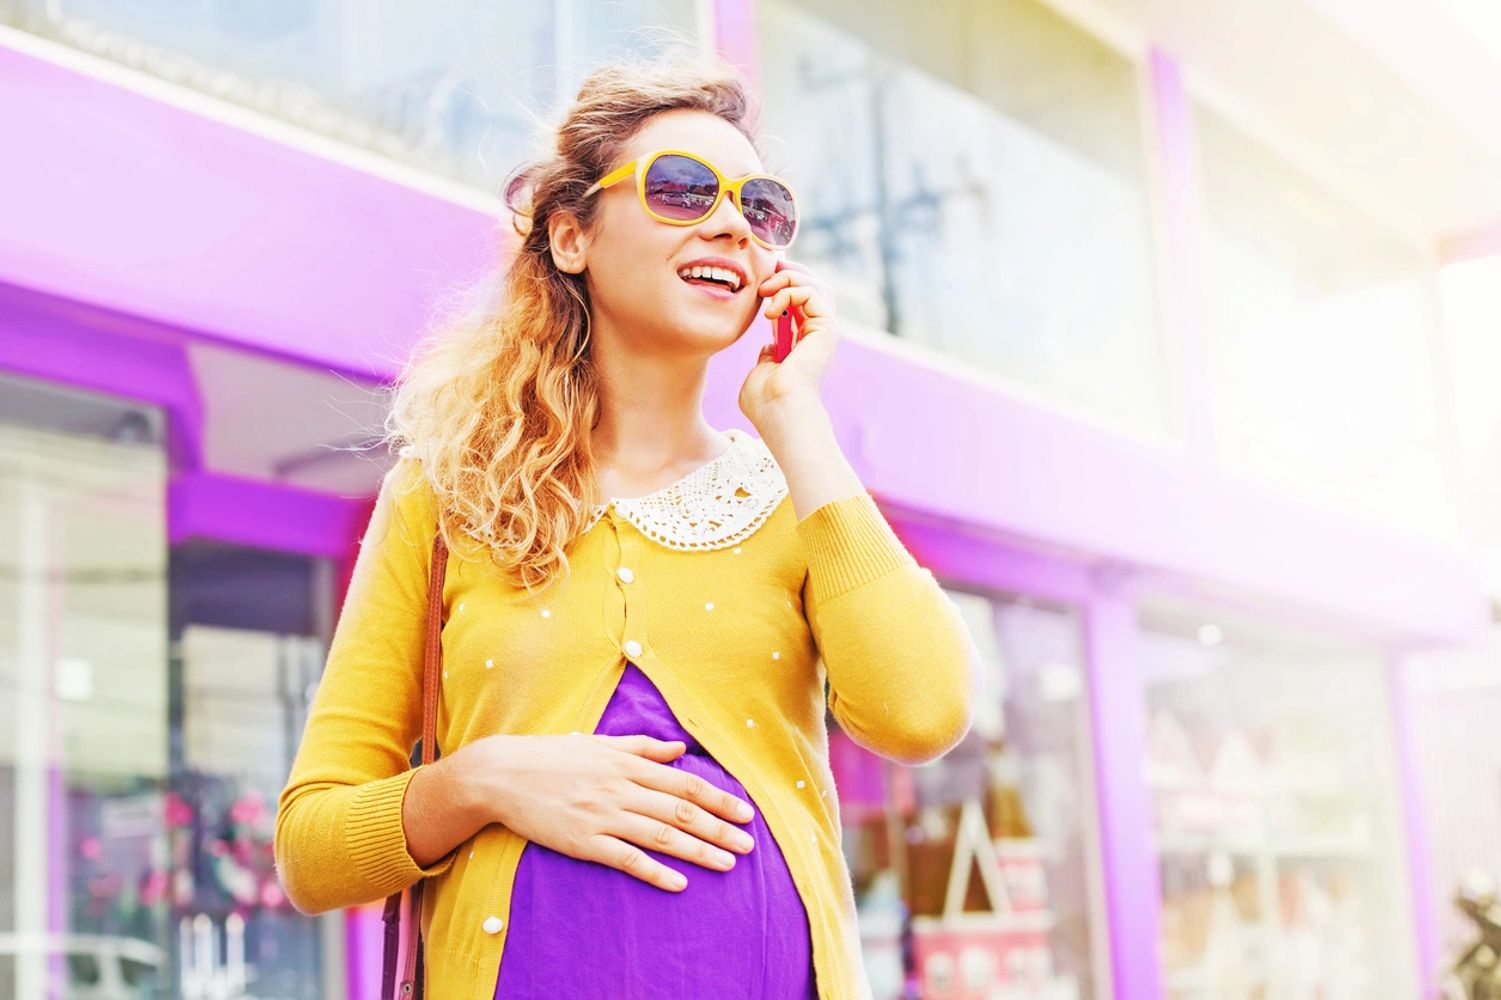 Where Can You Find Used Maternity Clothes? Try These Sites